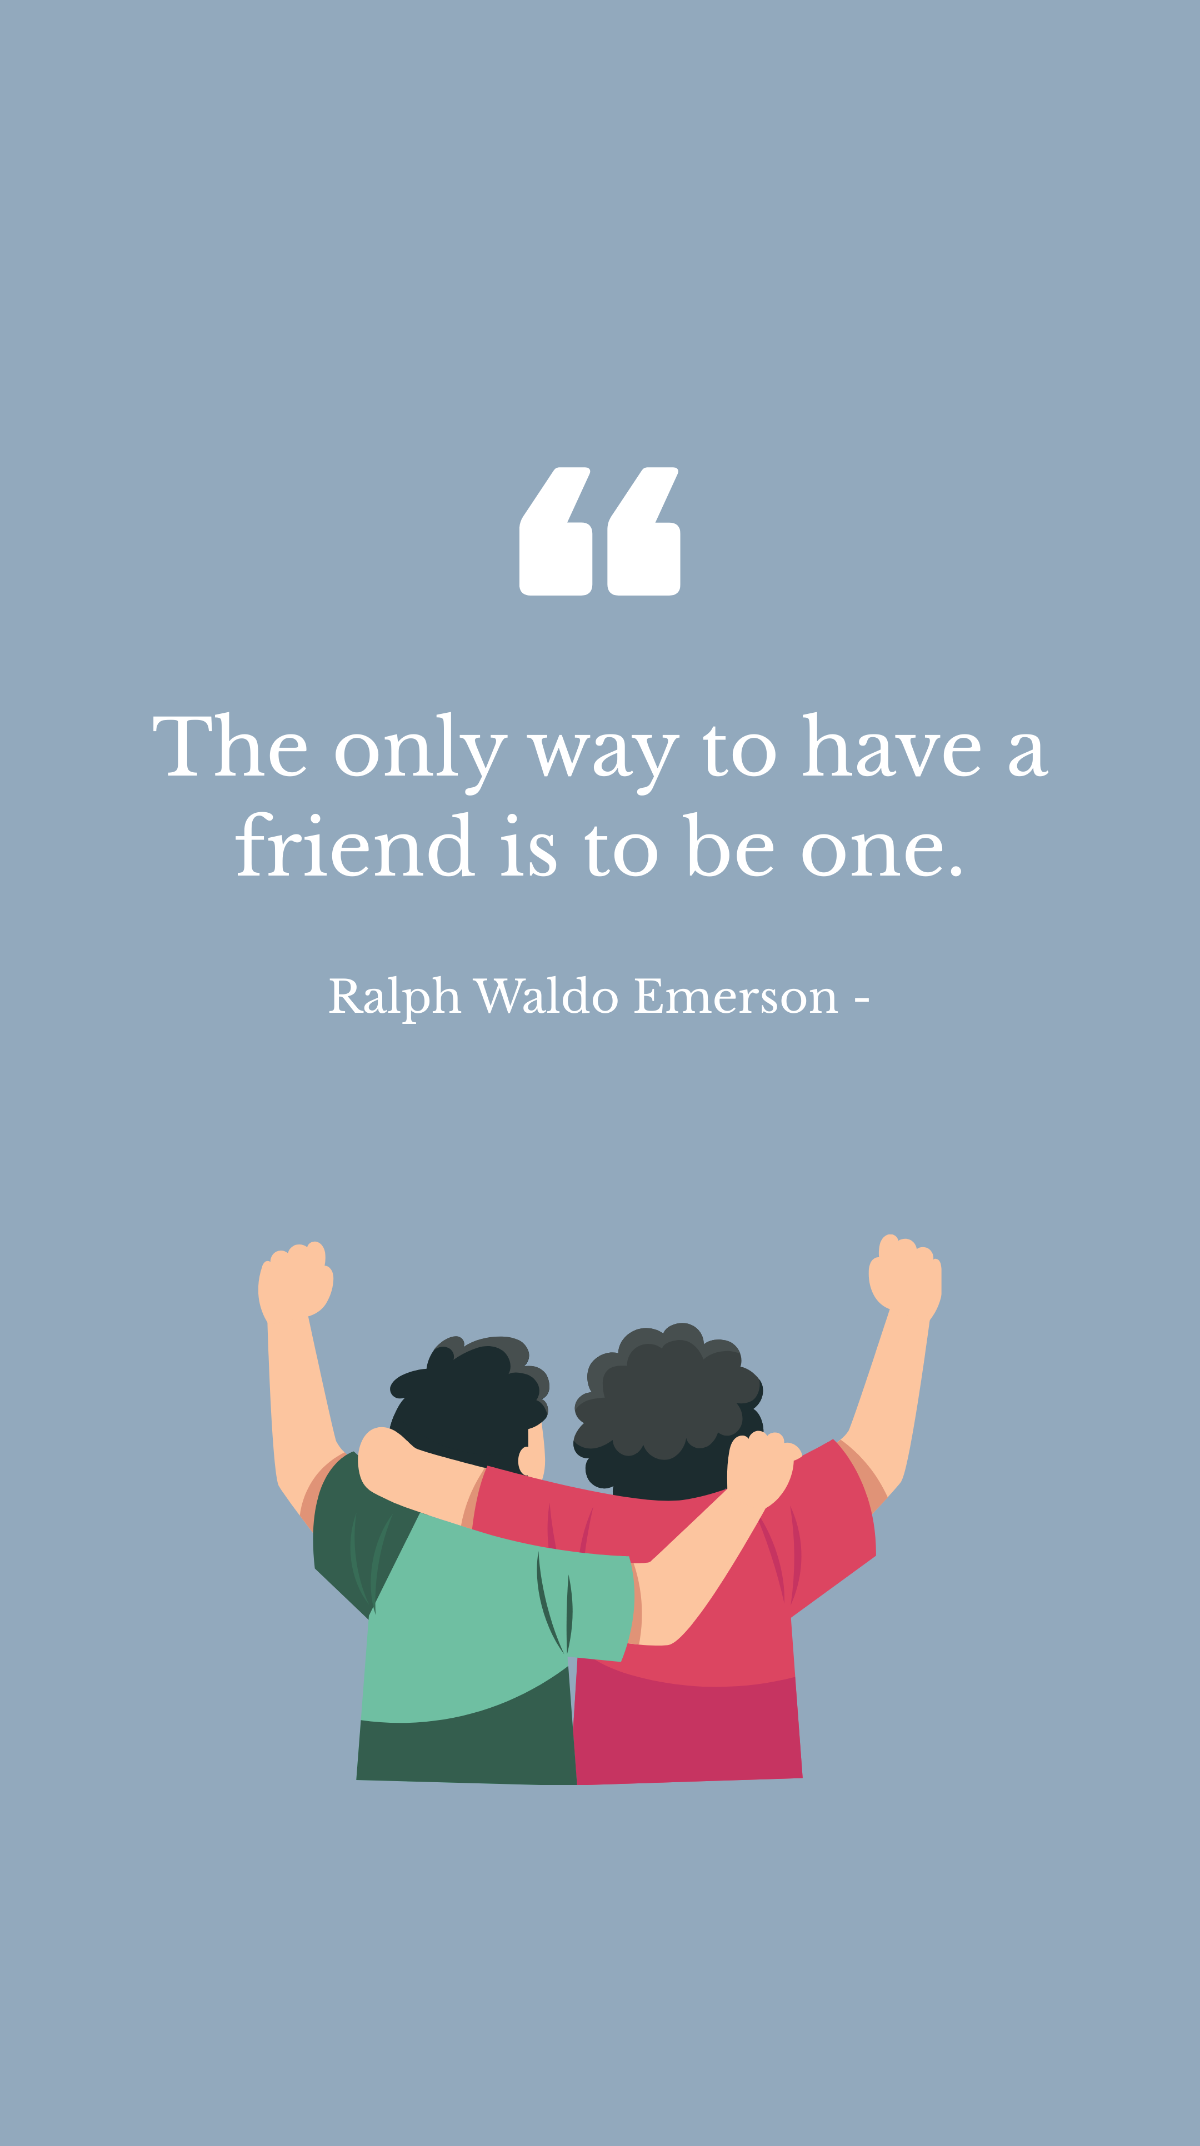 Ralph Waldo Emerson - The only way to have a friend is to be one. Template